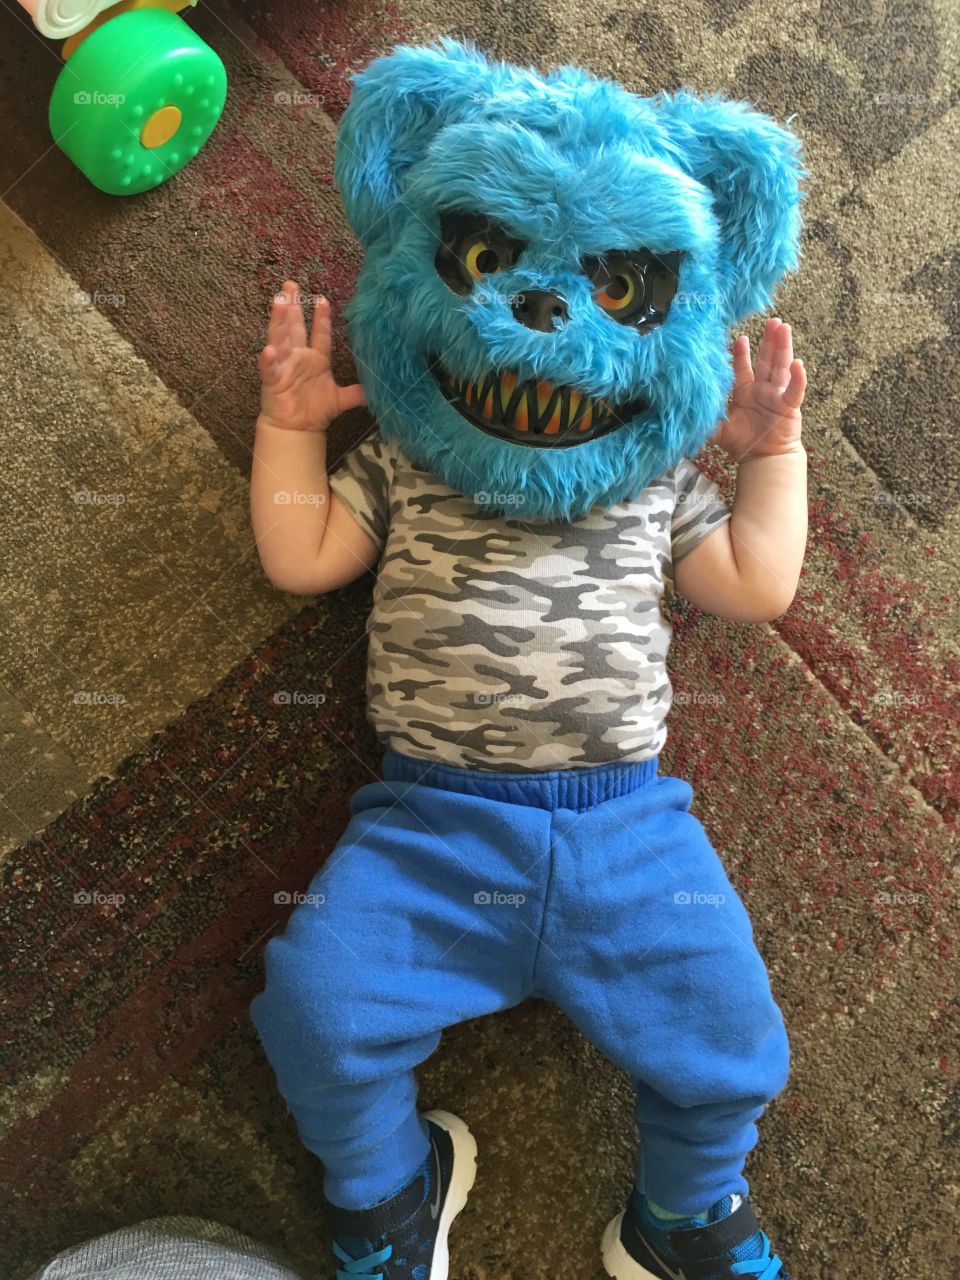 My son with a scary mask on for Halloween. This wasn’t his costume he just really loved the mask. 